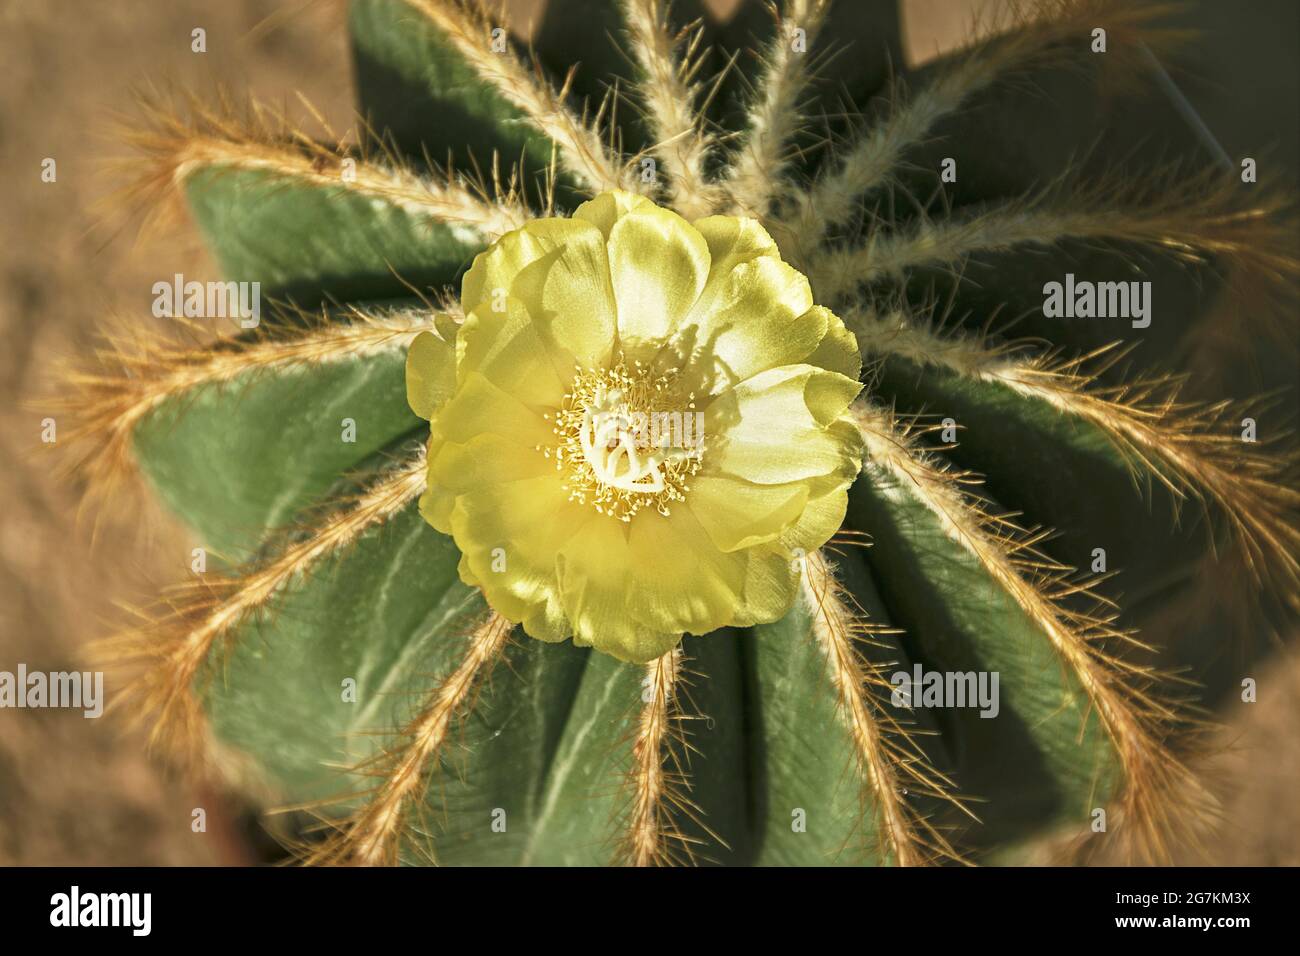 top view of a single shimmering bright yellow flower on a small symmetrical Parodia magnifica balloon cactus plant with blurred soil in the background Stock Photo